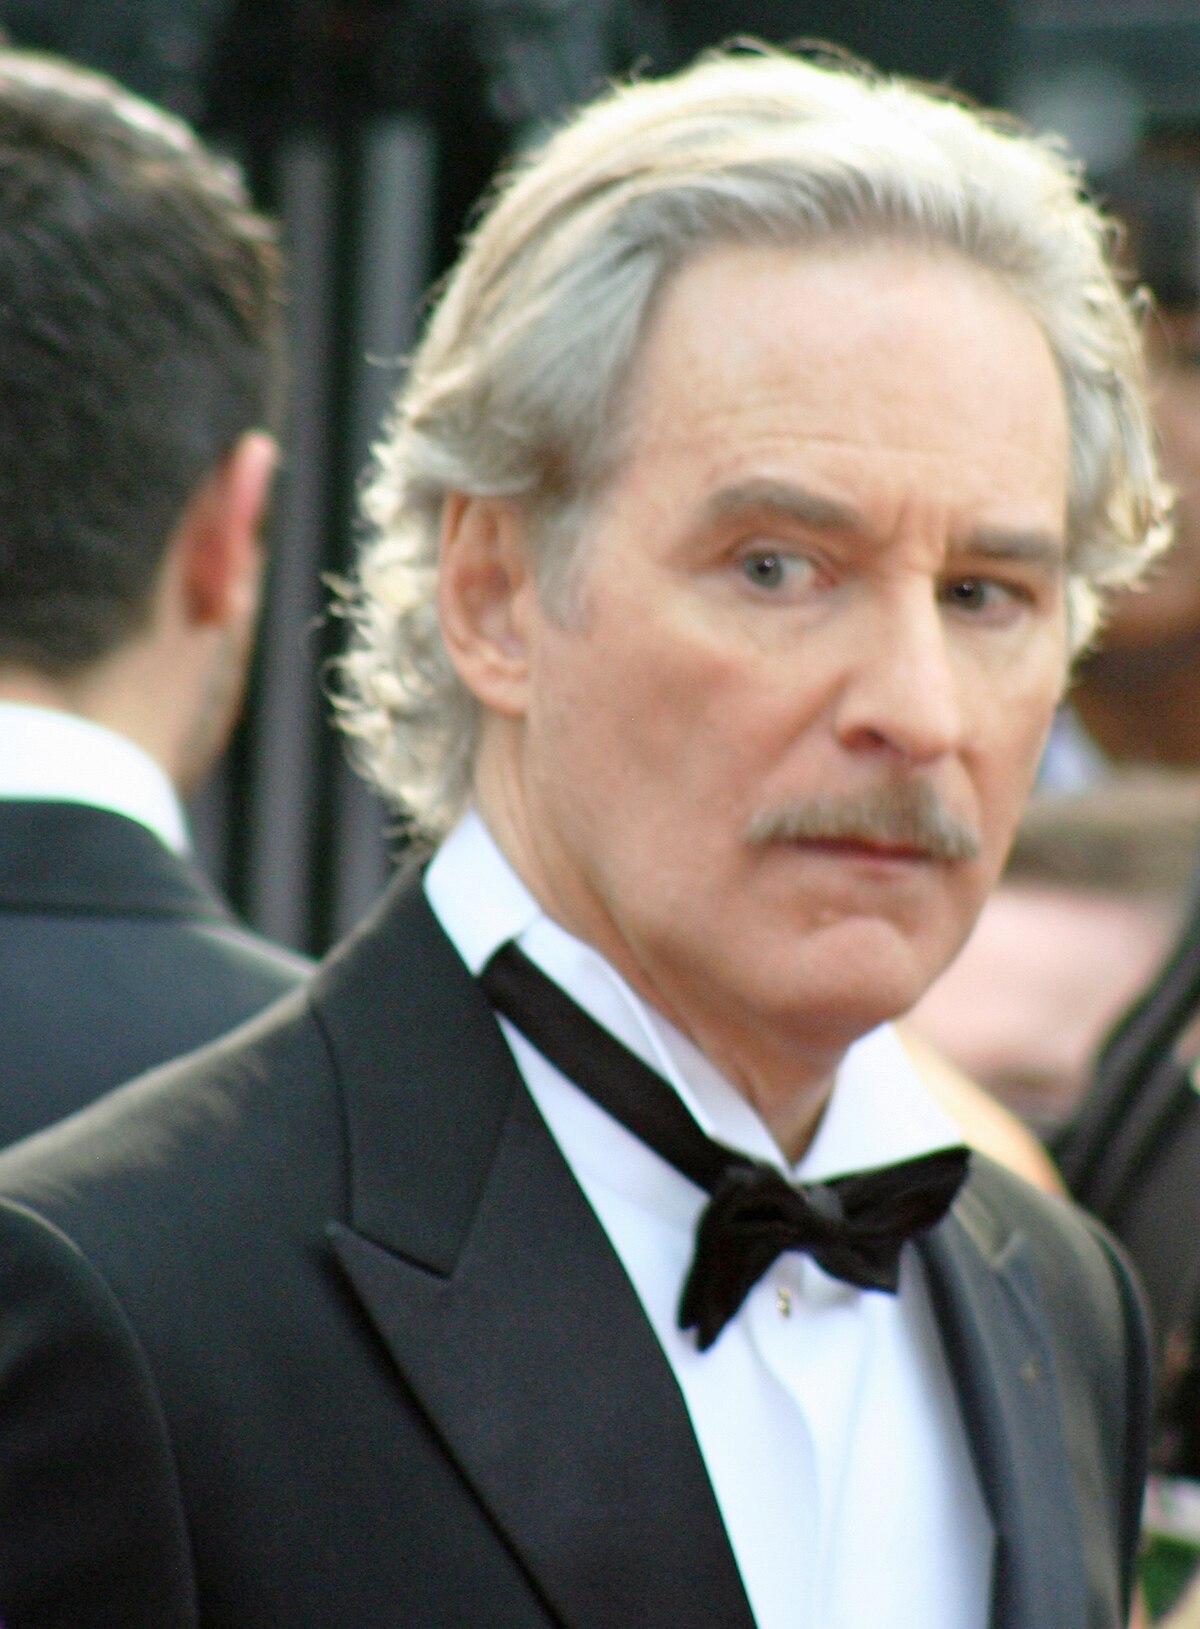 Kevin Kline on screen and stage - Wikipedia